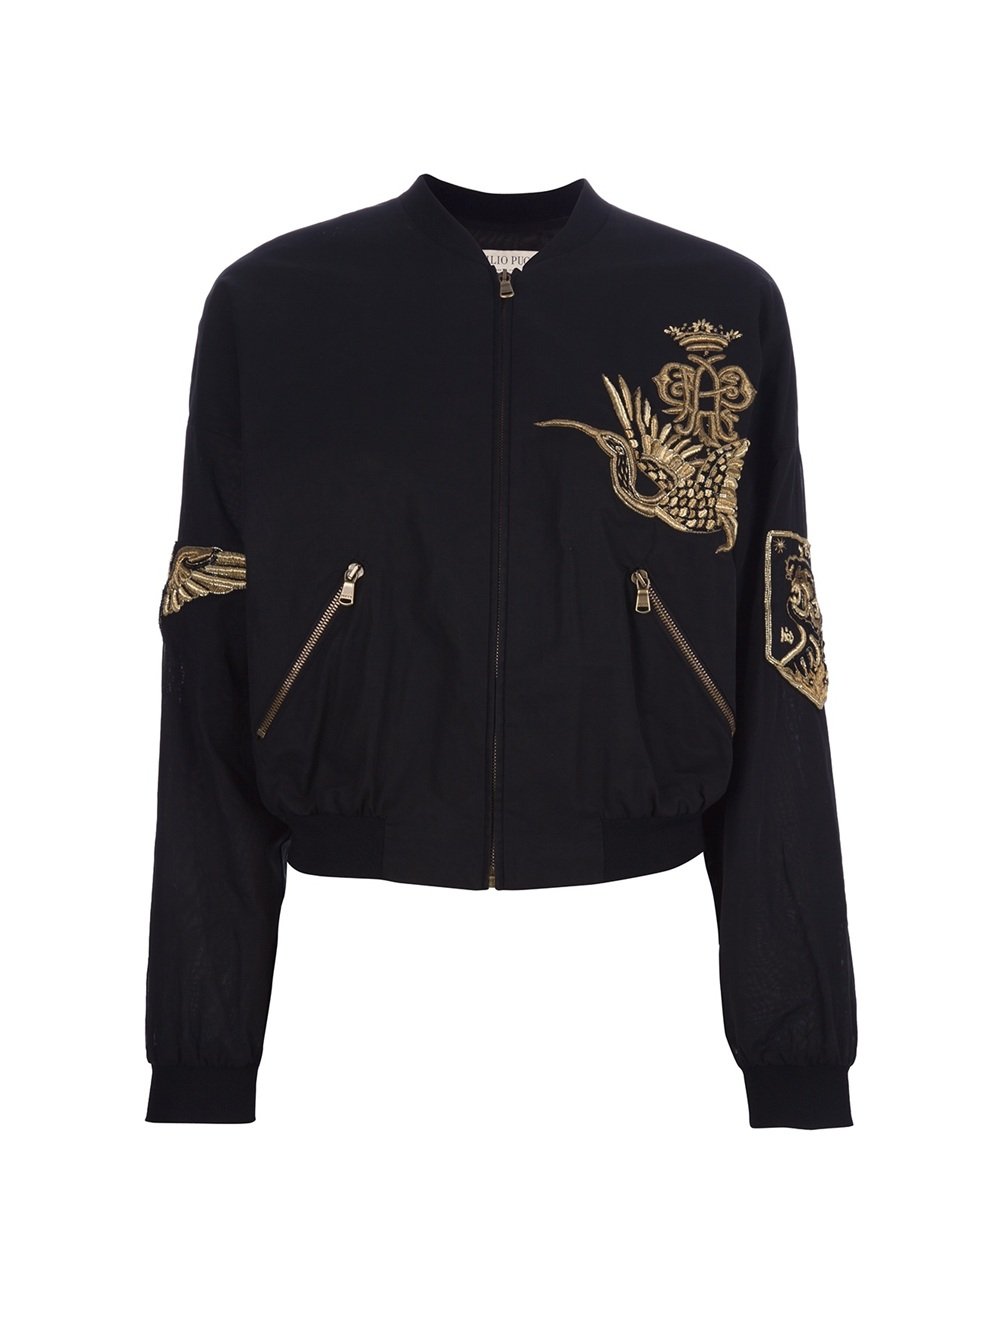 Emilio Pucci Embroidered Bomber Jacket in Brown (black) | Lyst